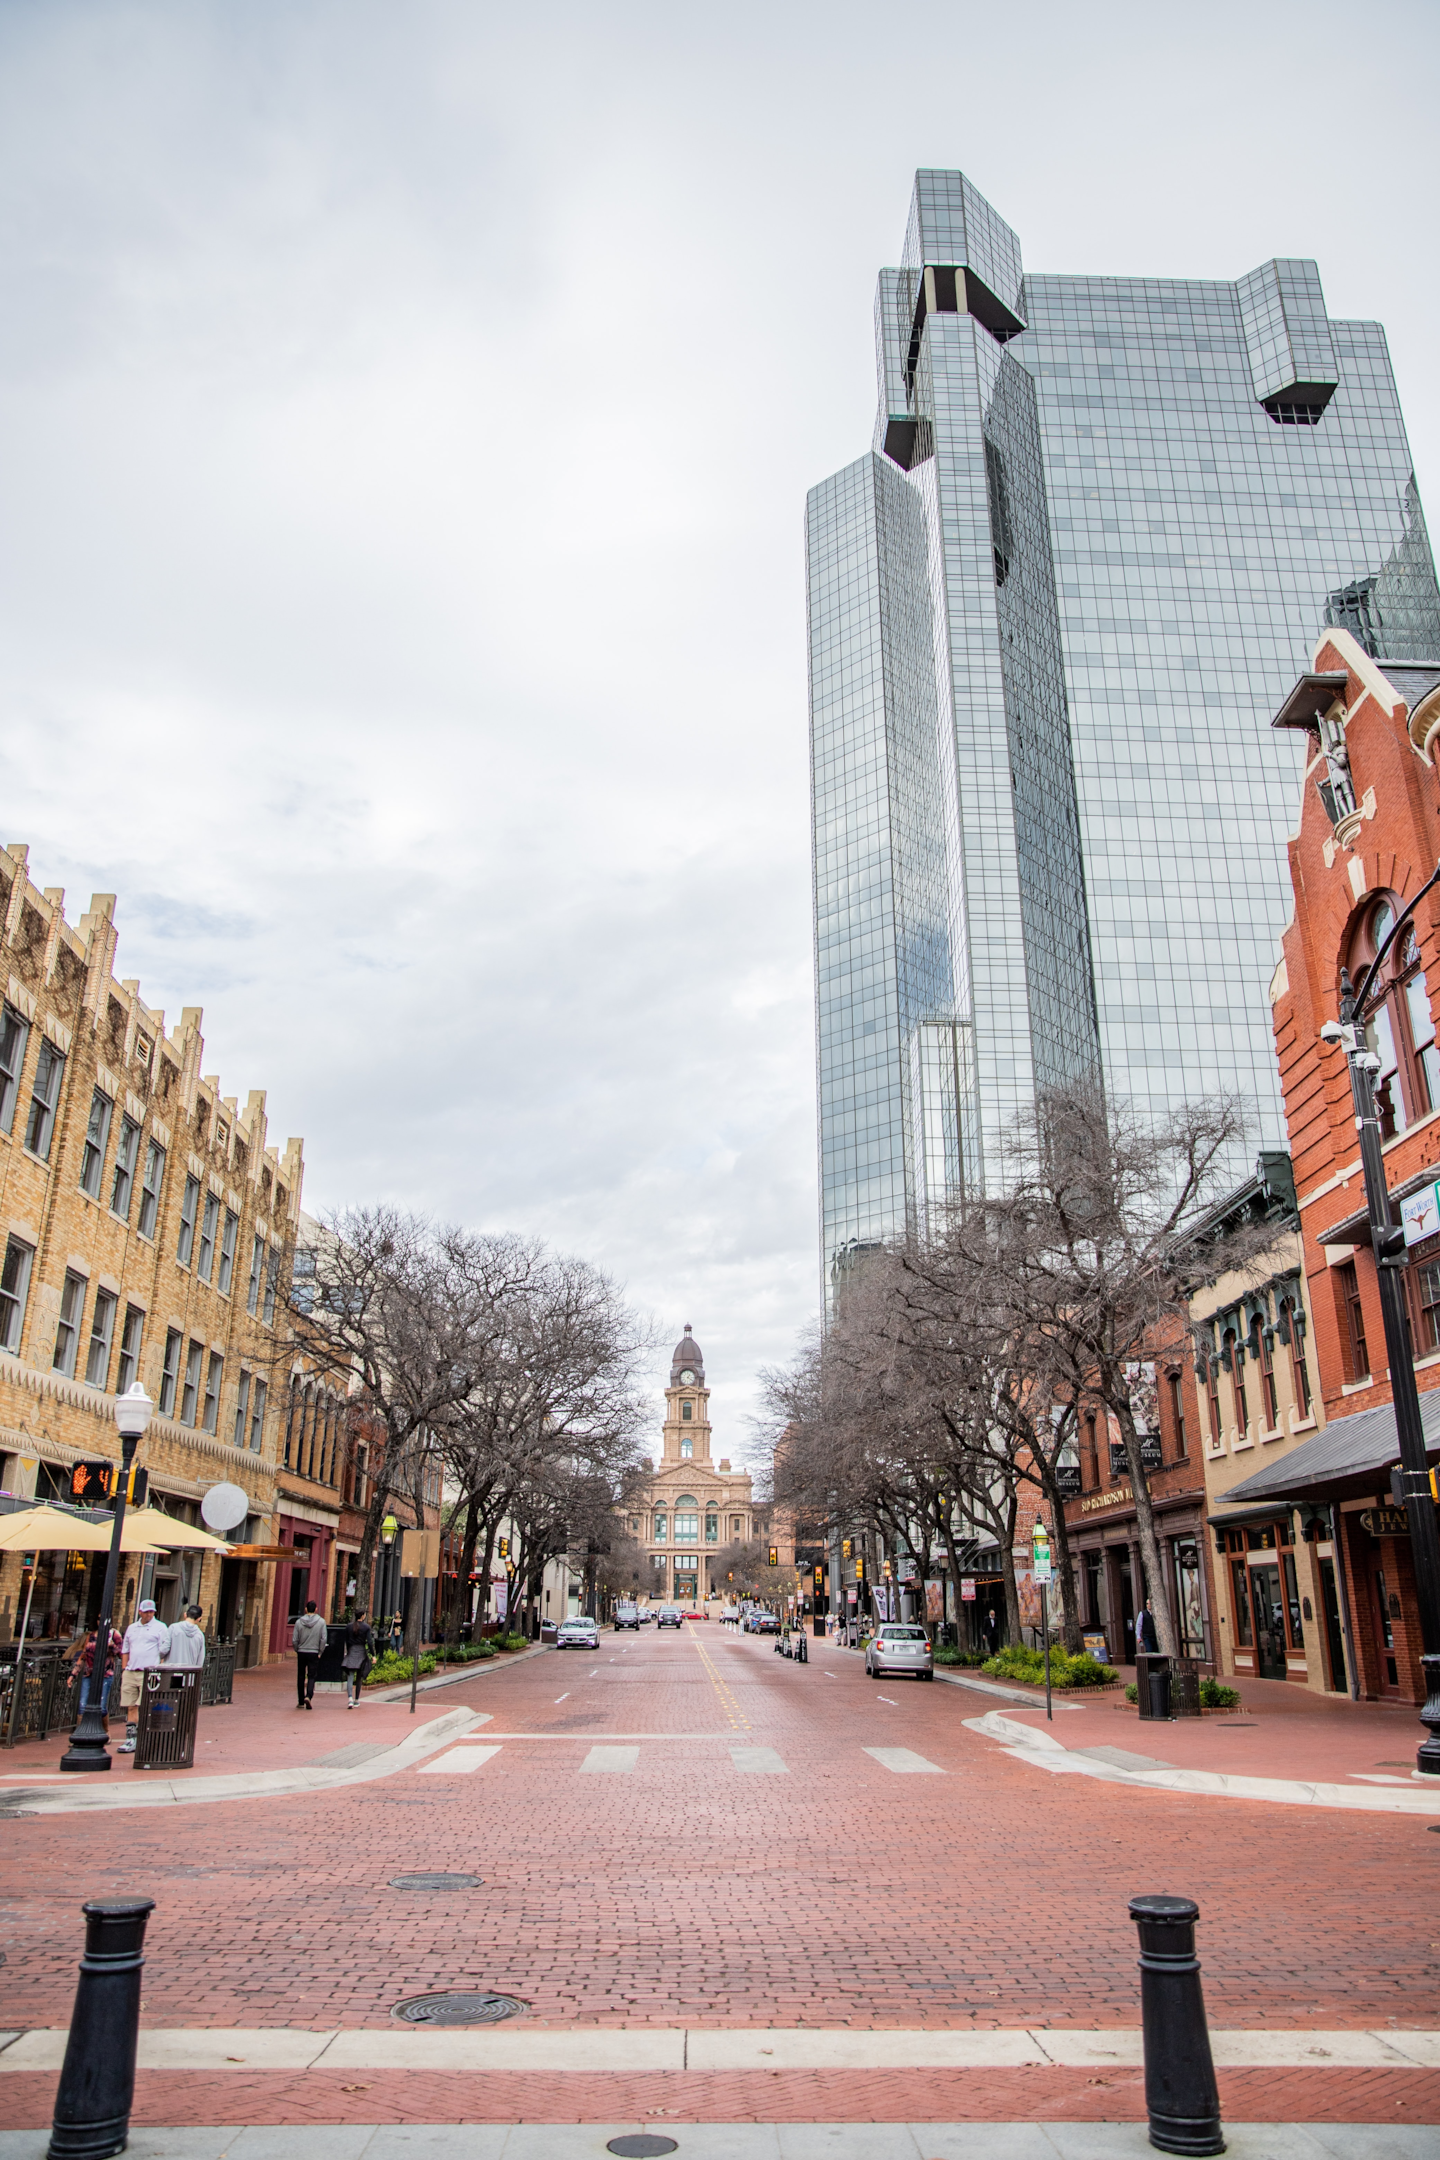 Attract customers and new business by communicating a clear vision of who you are, like the City of Fort Worth